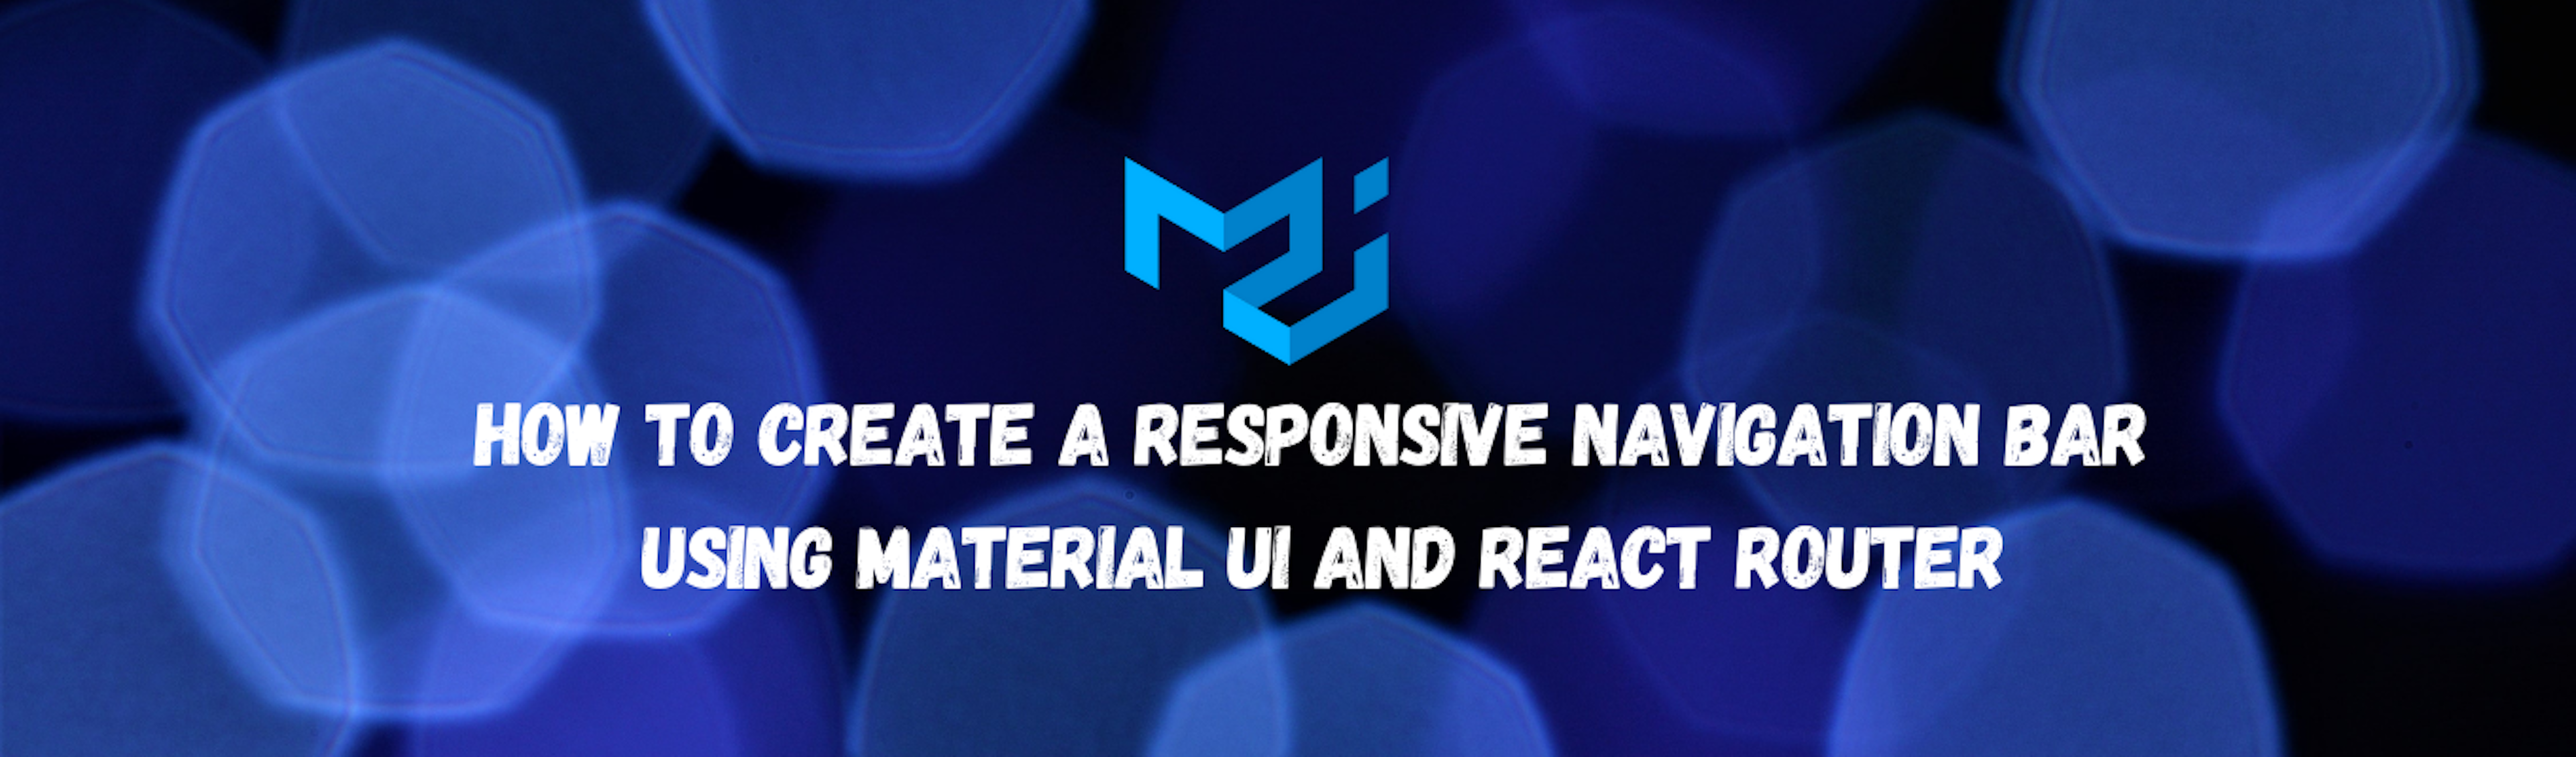 How to Create a Responsive Navbar Using Material UI and React Router 